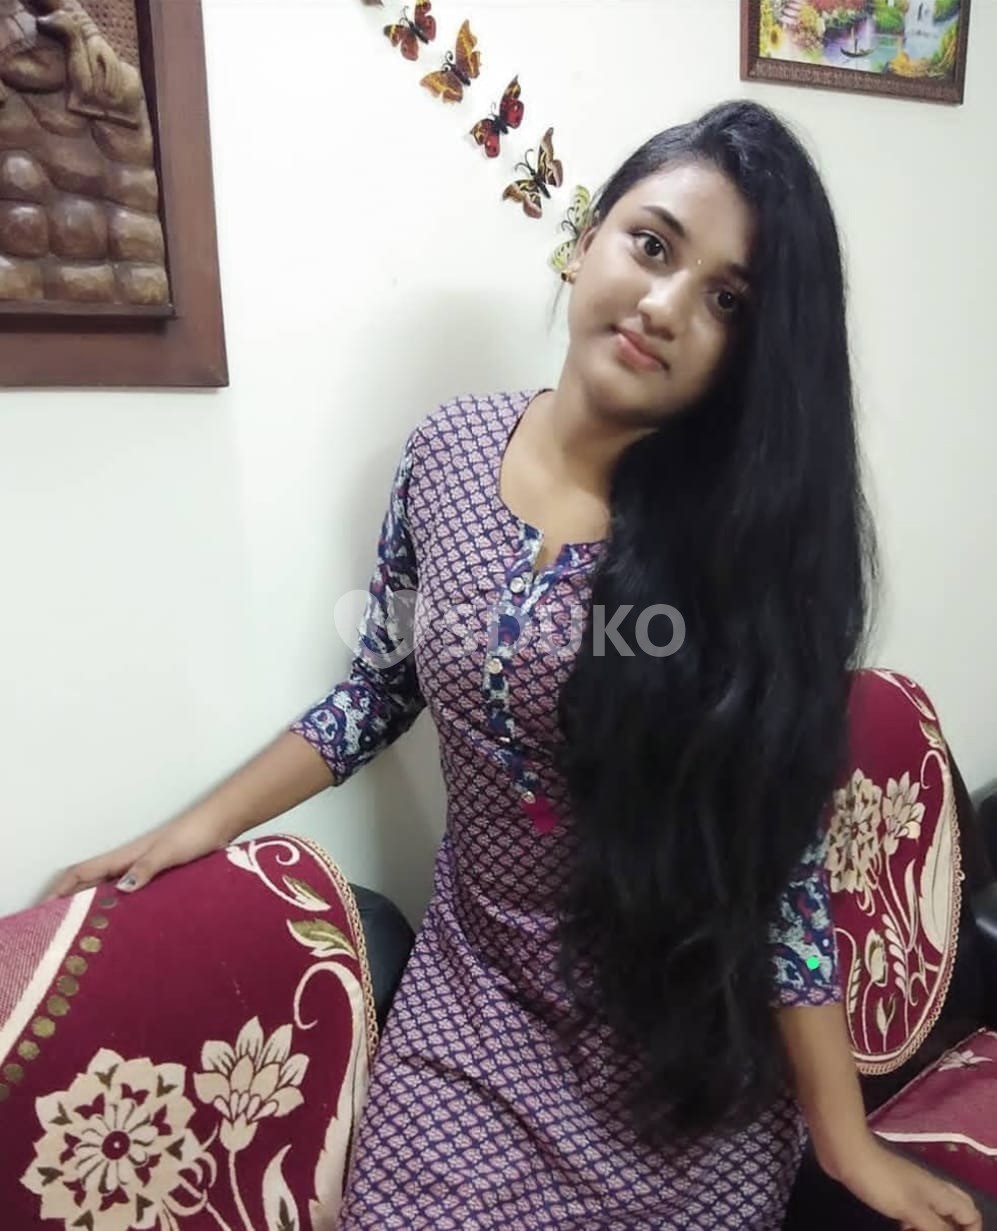 Peenya..... low price 🥰..100% SAFE AND SECURE TODAY LOW PRICE UNLIMITED ENJOY HOT COLLEGE GIRL HOUSEWIFE AUNTIES AVAI